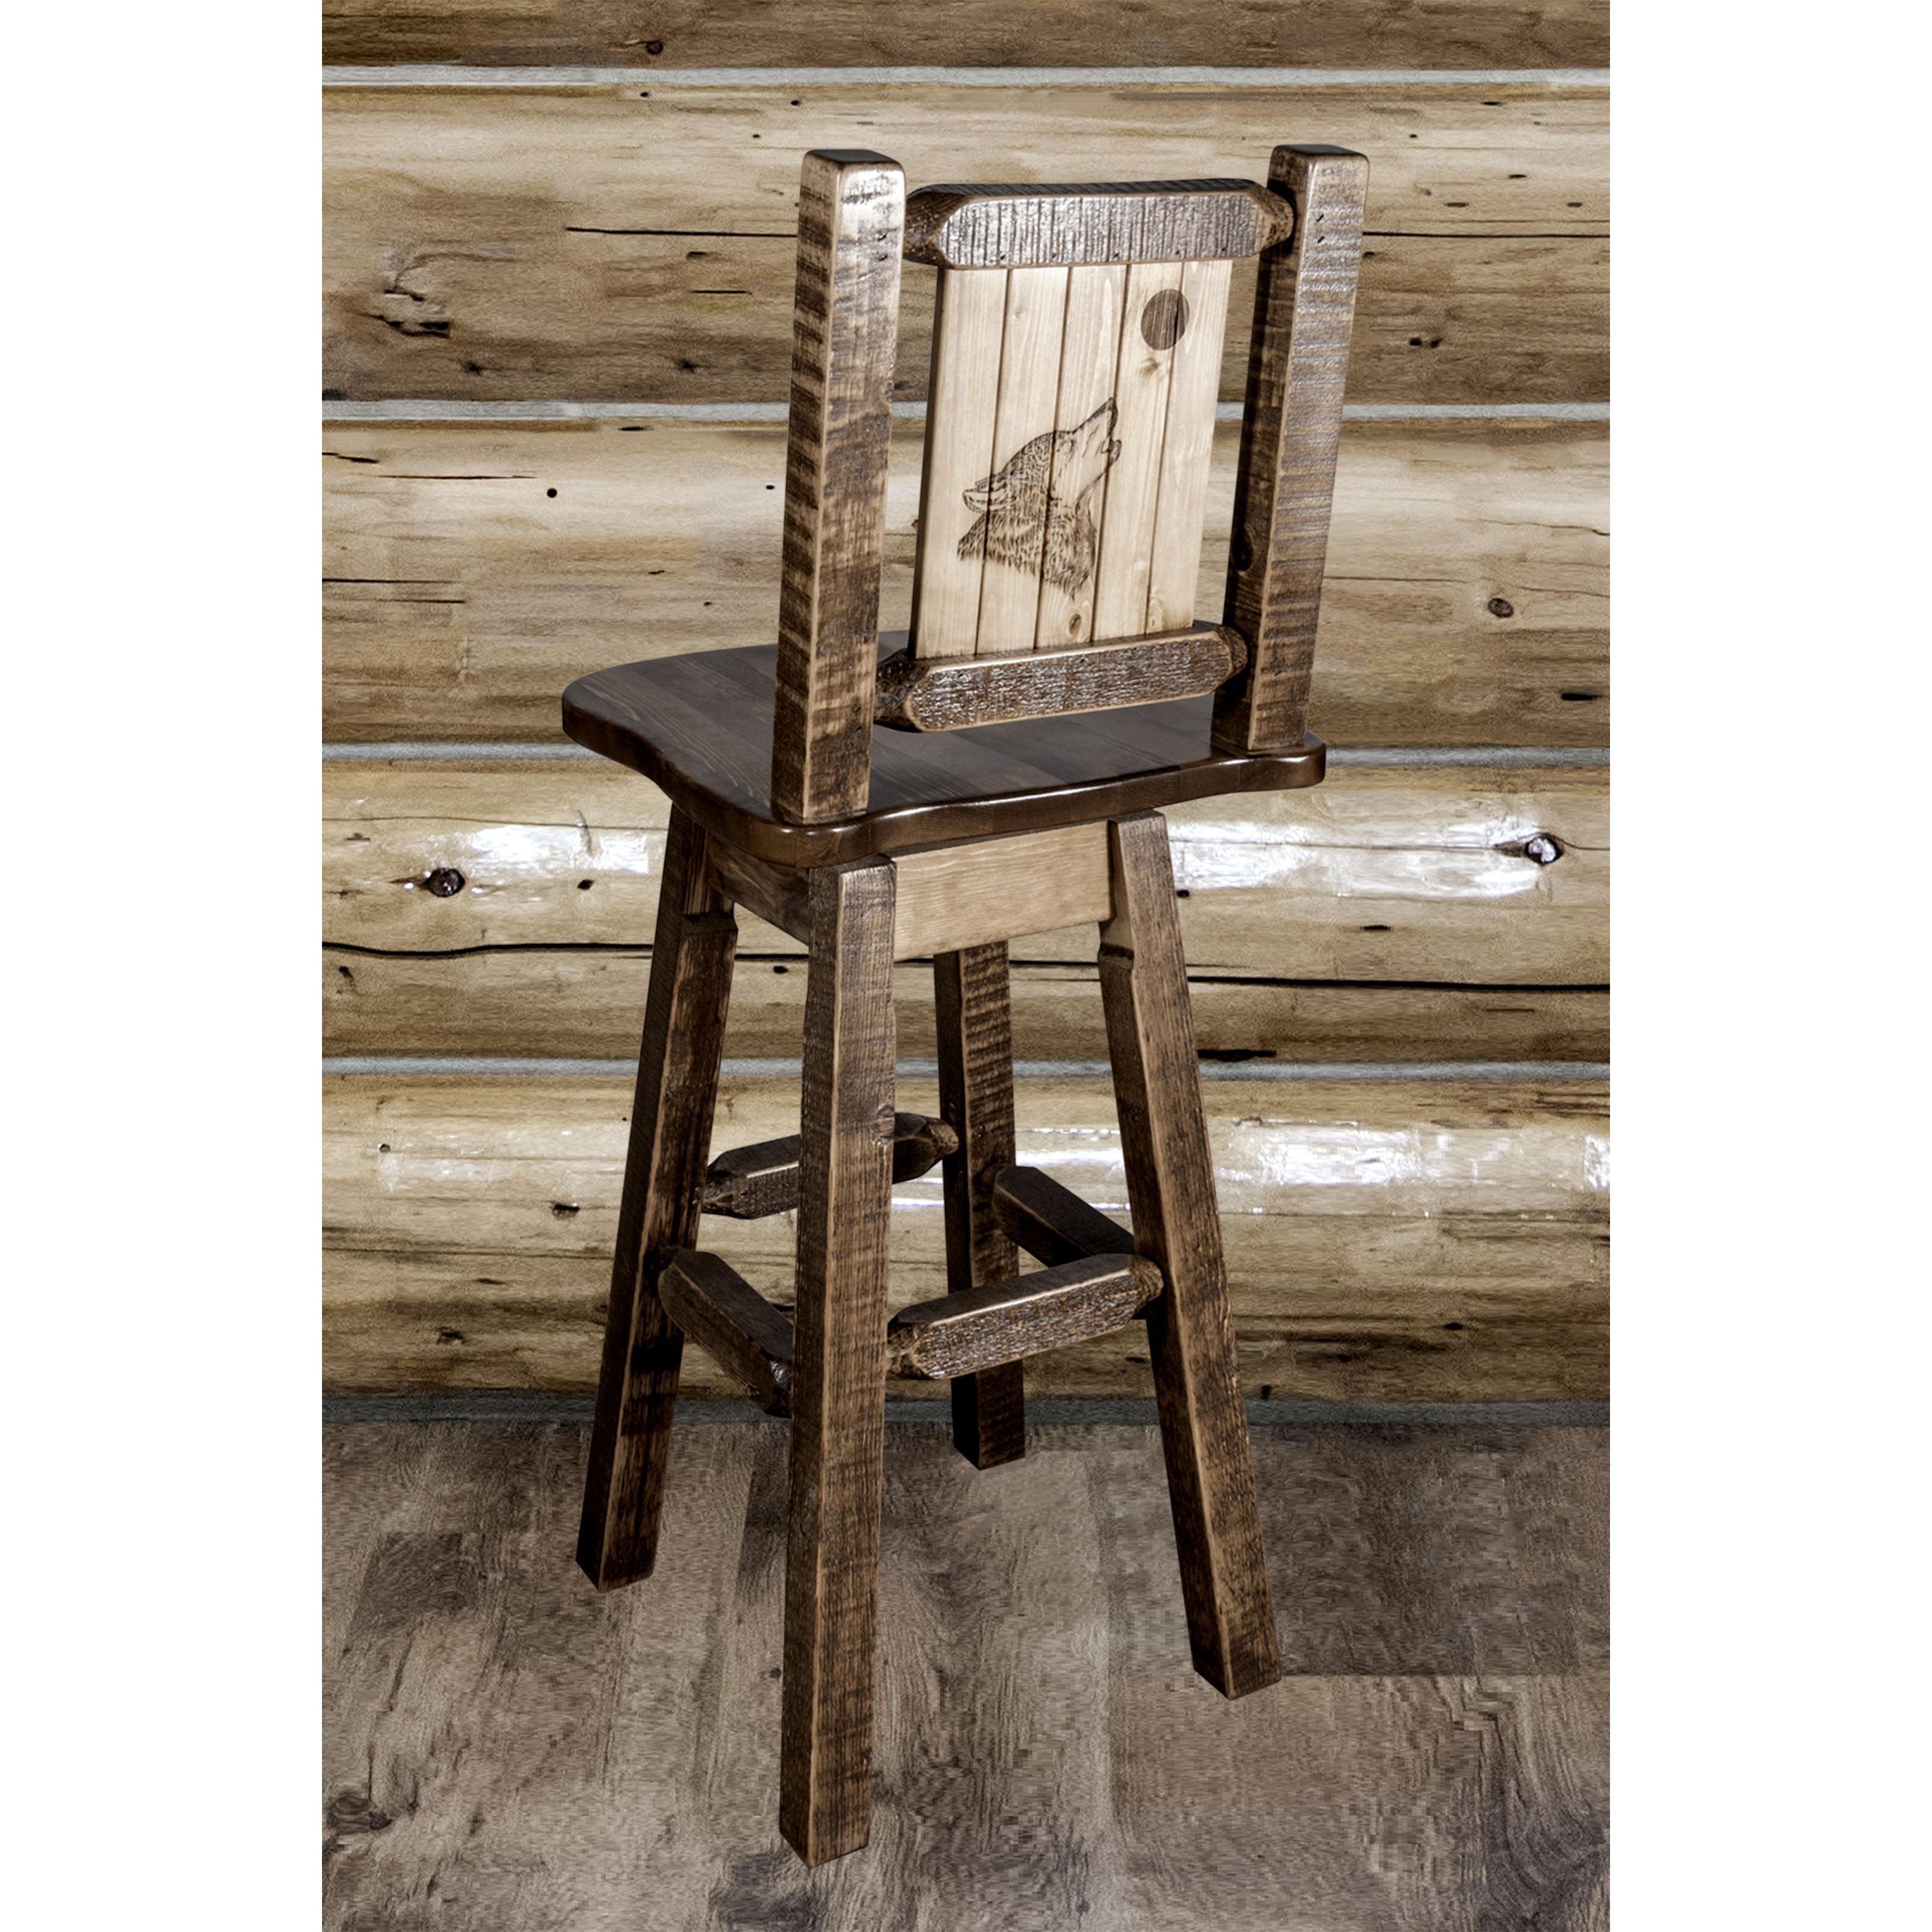 montana woodworks homestead collection barstool with back swivel and laser engraved wolf design stain lacquer finish mwhcbswsnrsllzwolf indoor